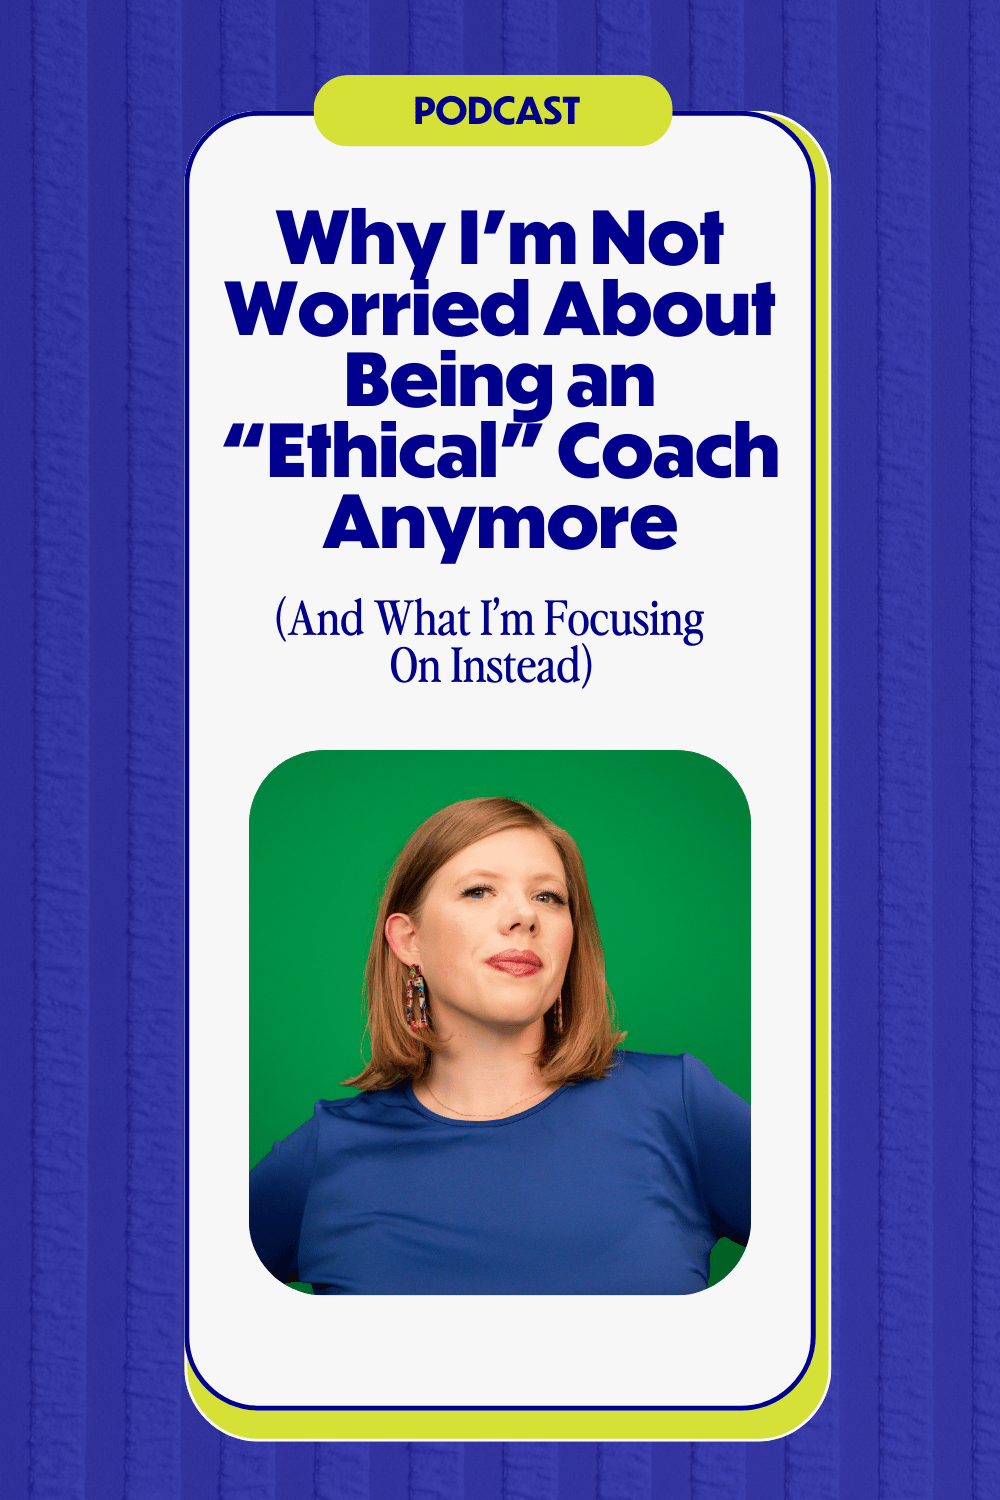 Ashley Rose, a Systems and Airtable Expert, in a blue top posing confidently against a green background, titled "Why I’m Not Worried About Being an 'Ethical' Coach Anymore."